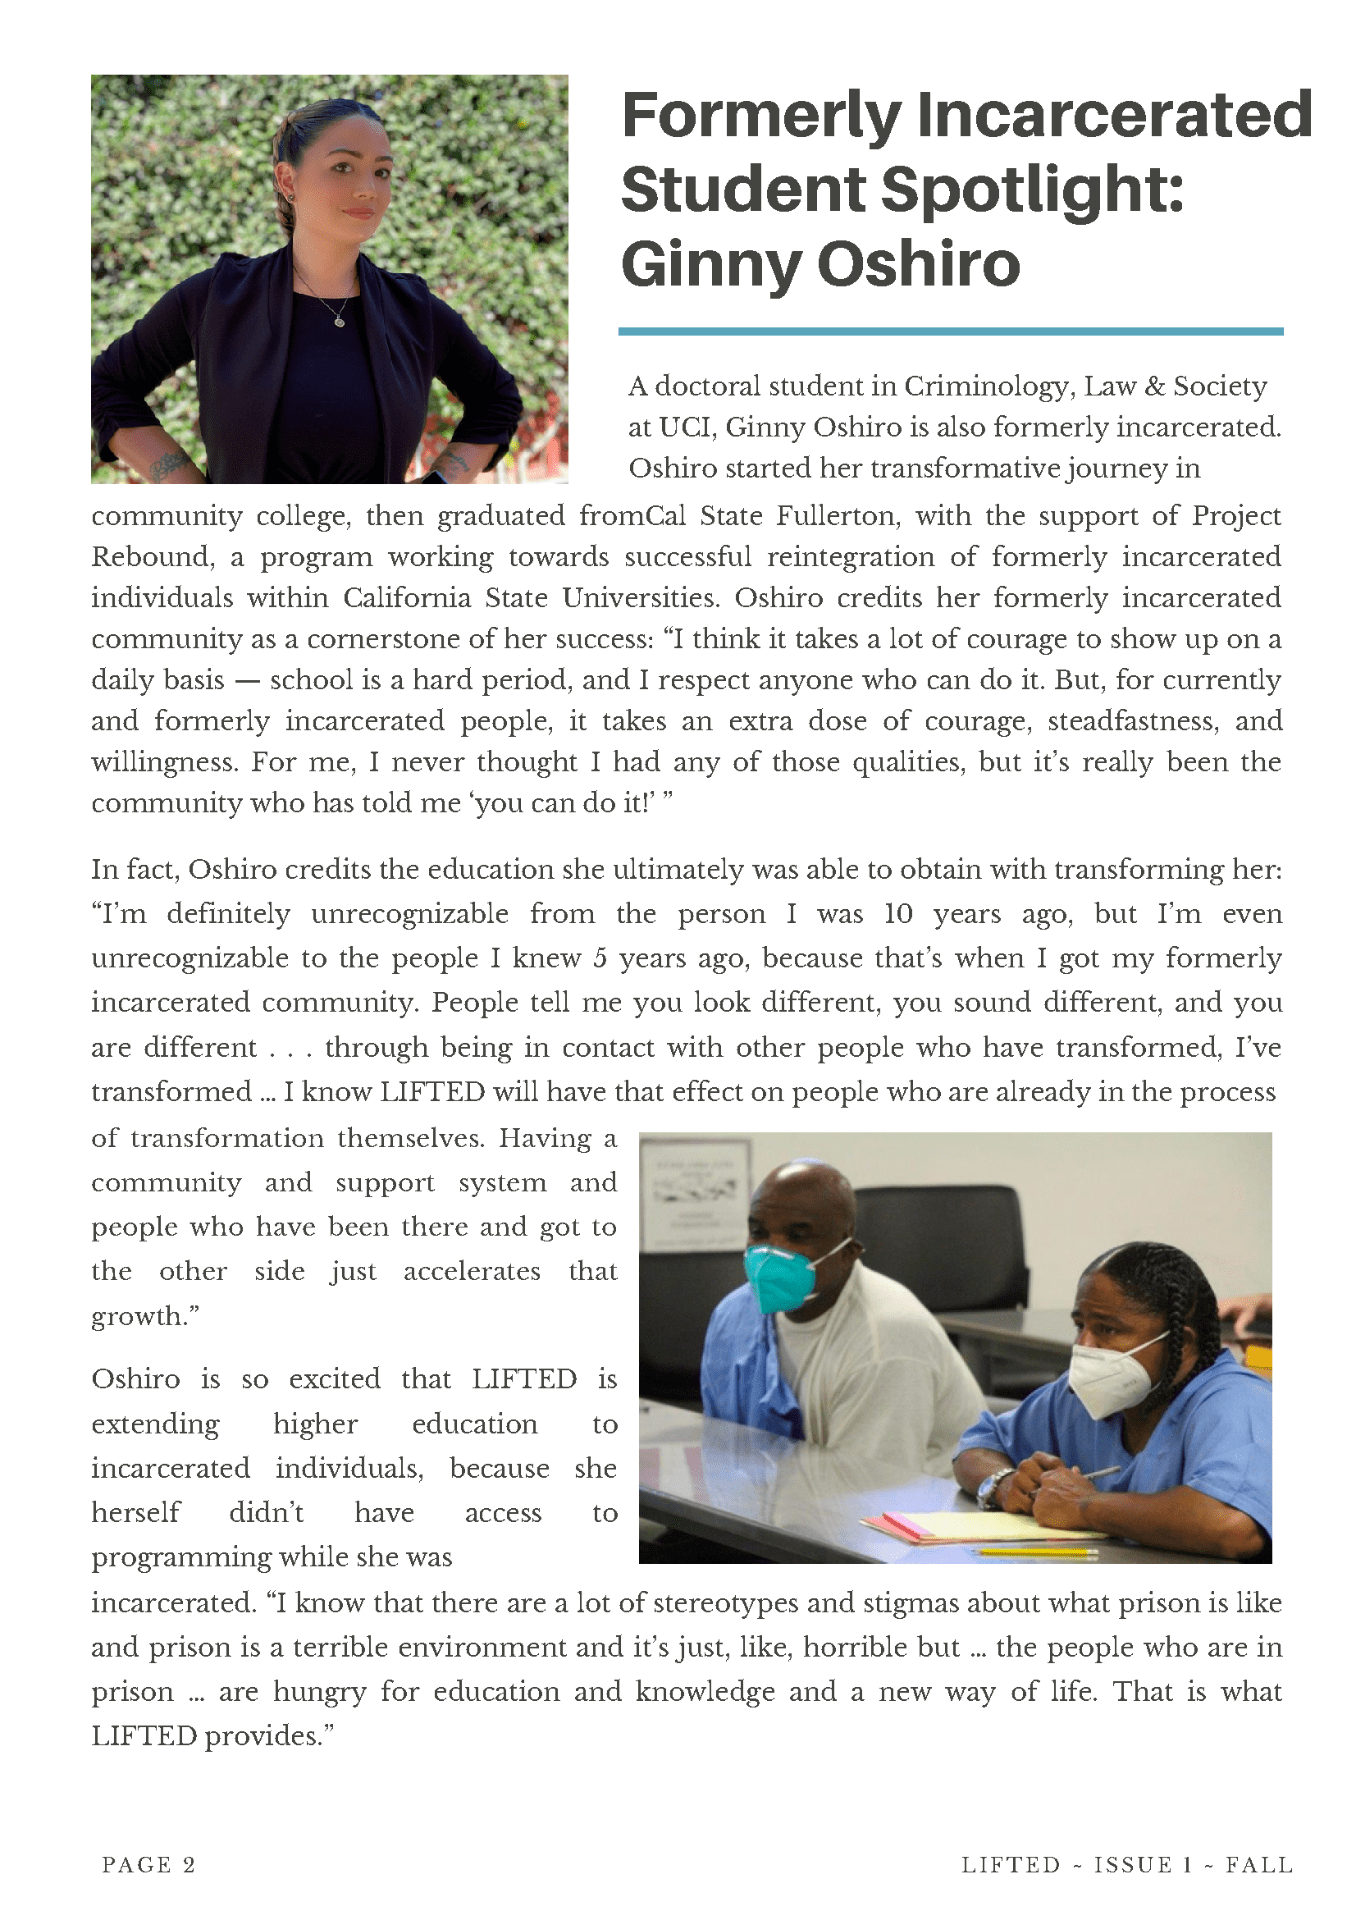 UCI LIFTED Newsletter wit photo of formerly incarcerated student standing with hands on her hips and a photo of incarcerated students sitting at their desk during class.